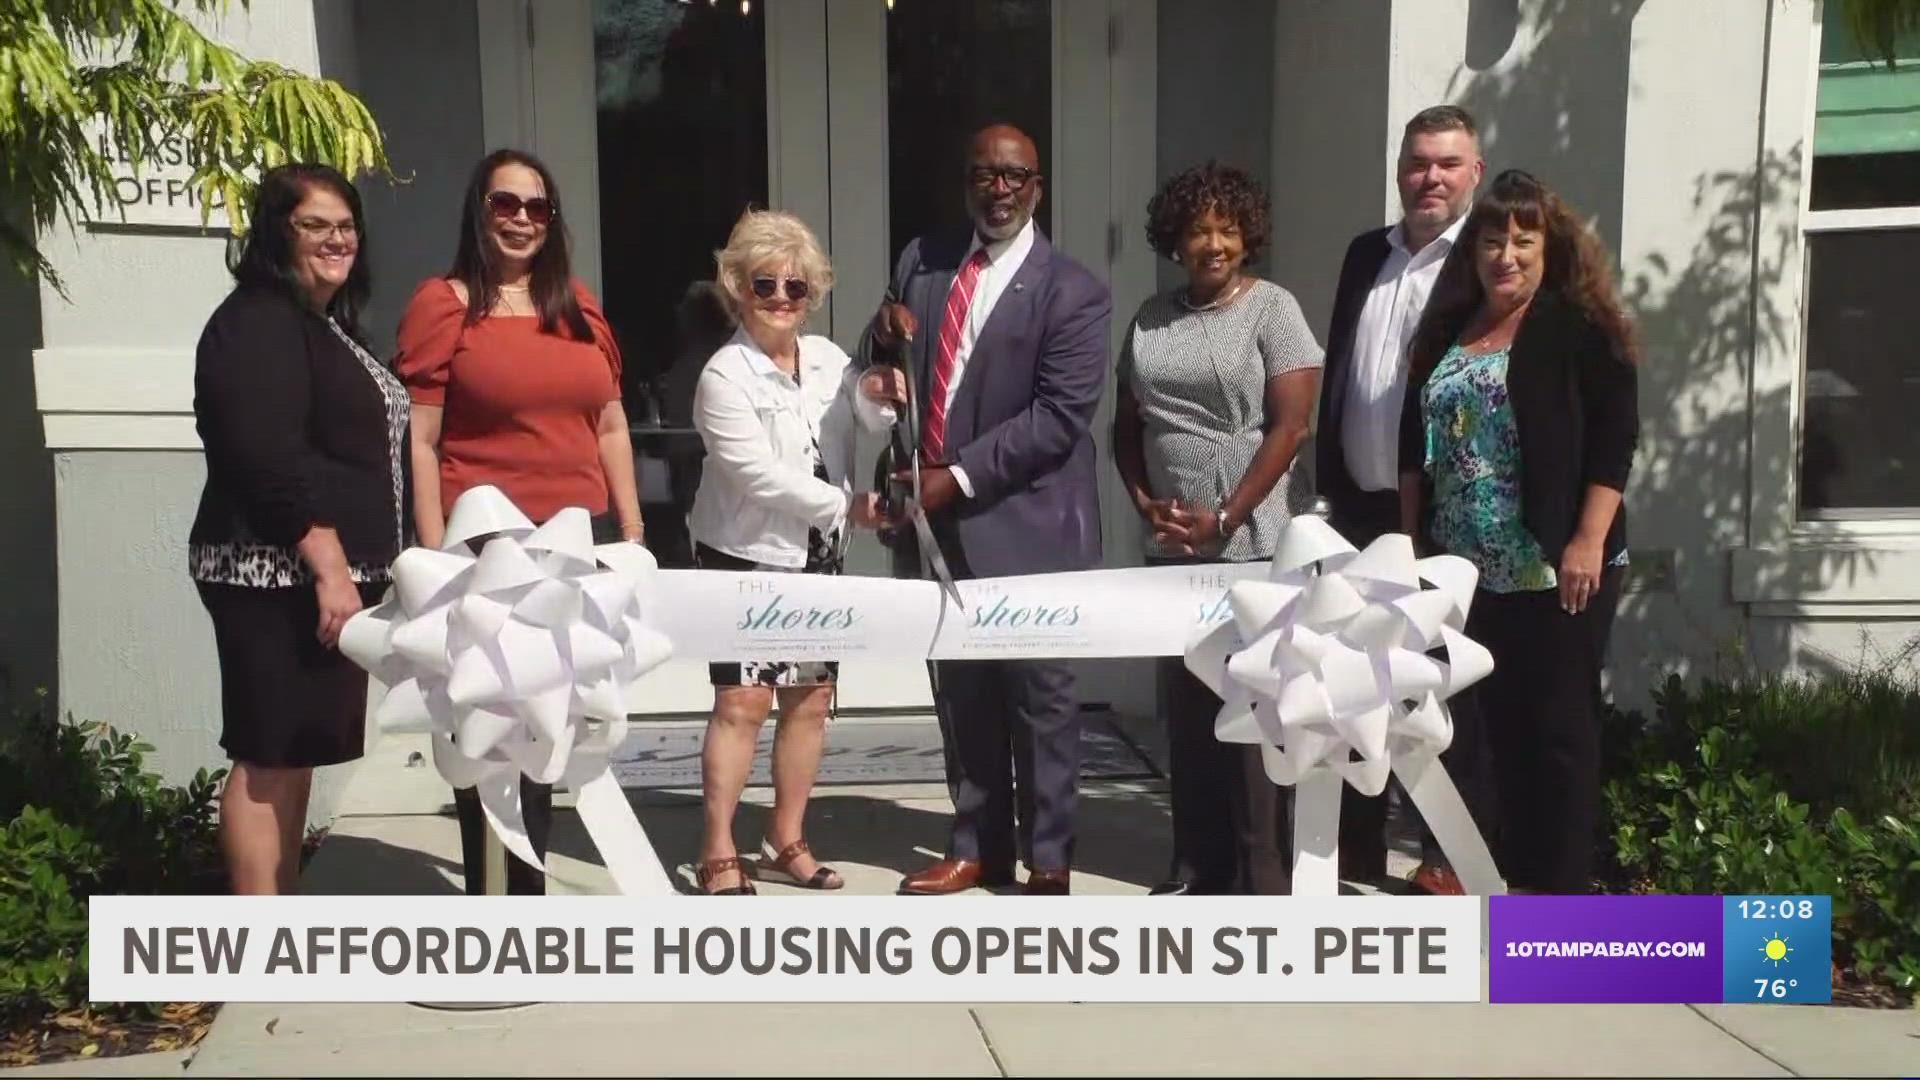 St. Pete leaders said this is a step in the right direction to provide more affordable housing options.